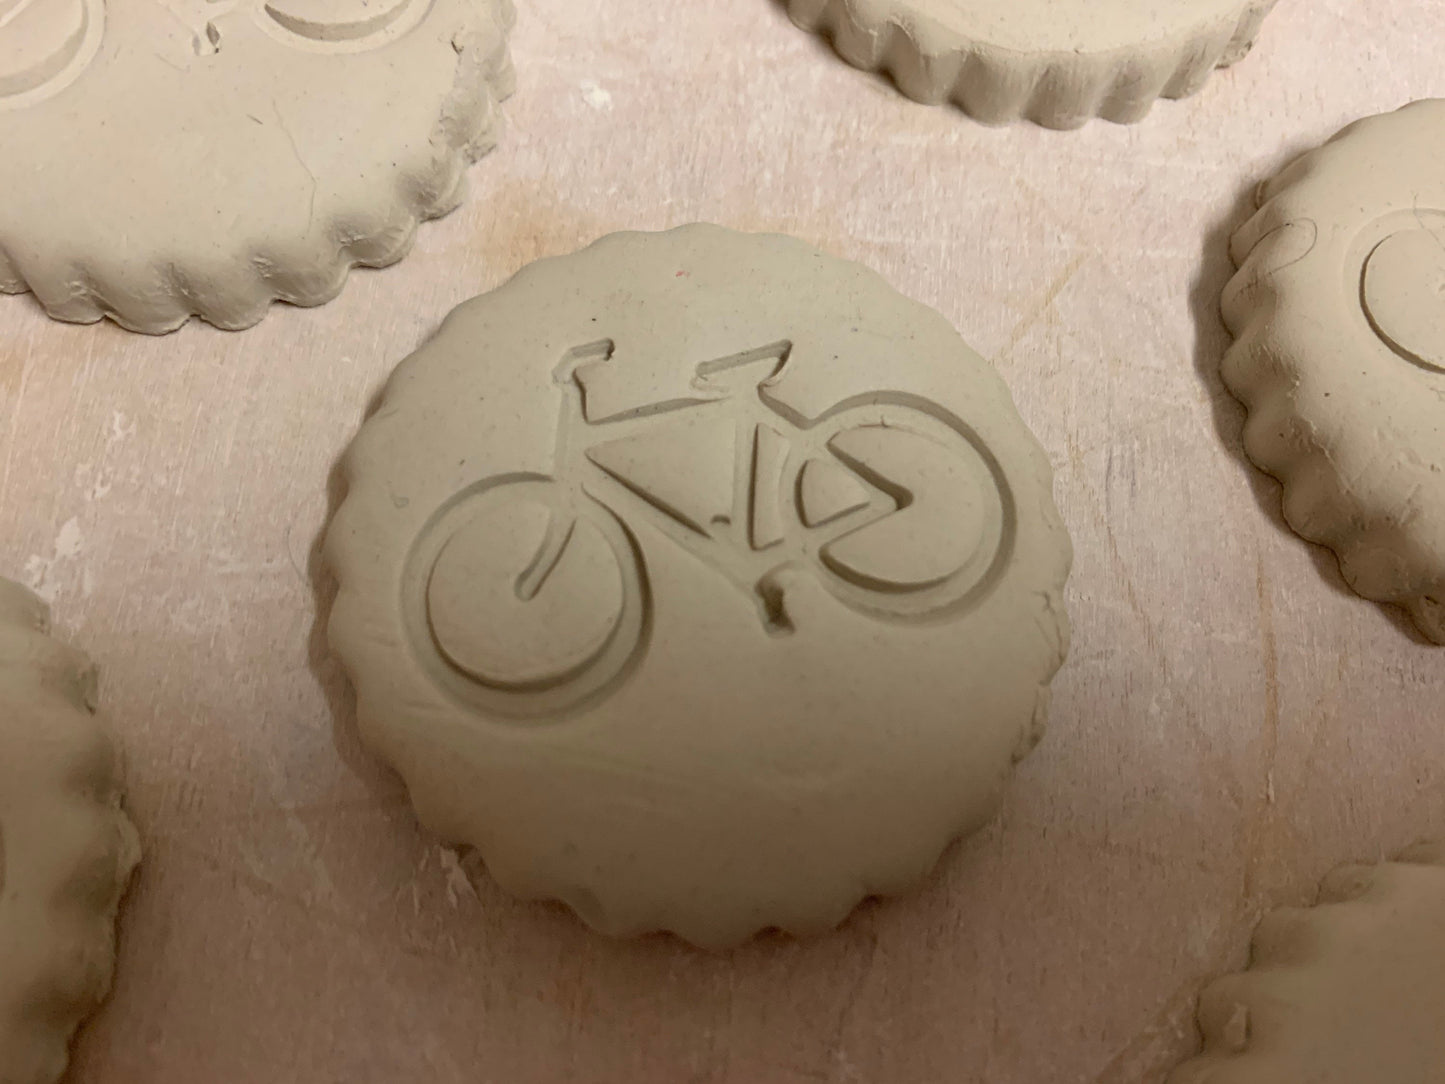 Pottery Stamp, Bike design, Fondant, Cookie Dough, leather, Clay, Pottery Tool, plastic 3d printed, multiple sizes available, Bicycle